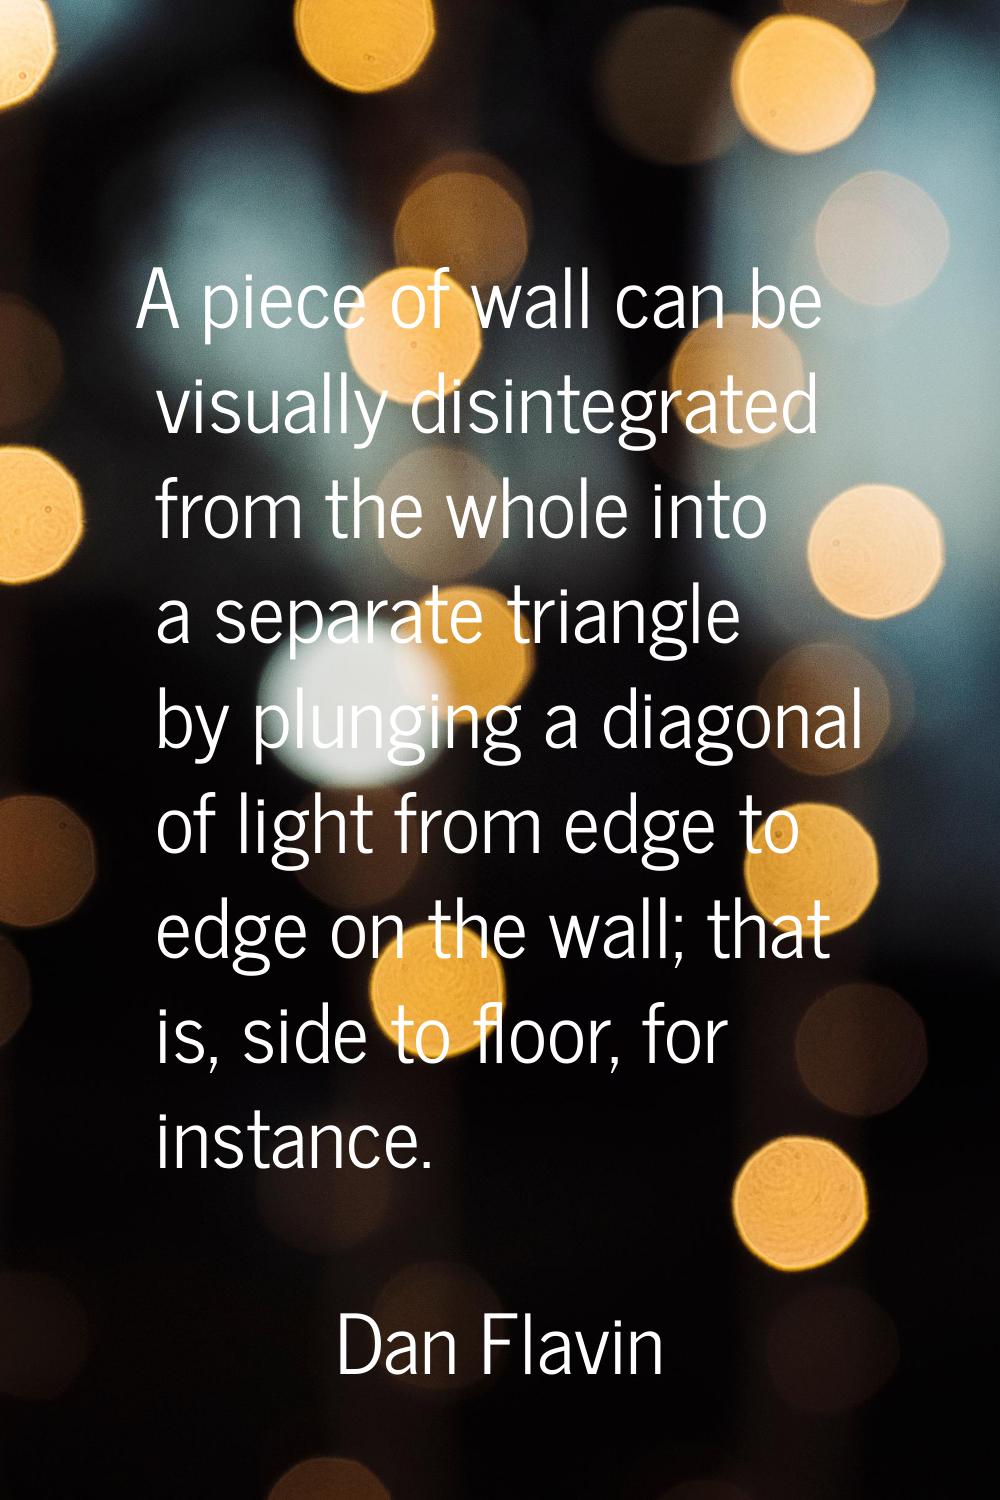 A piece of wall can be visually disintegrated from the whole into a separate triangle by plunging a